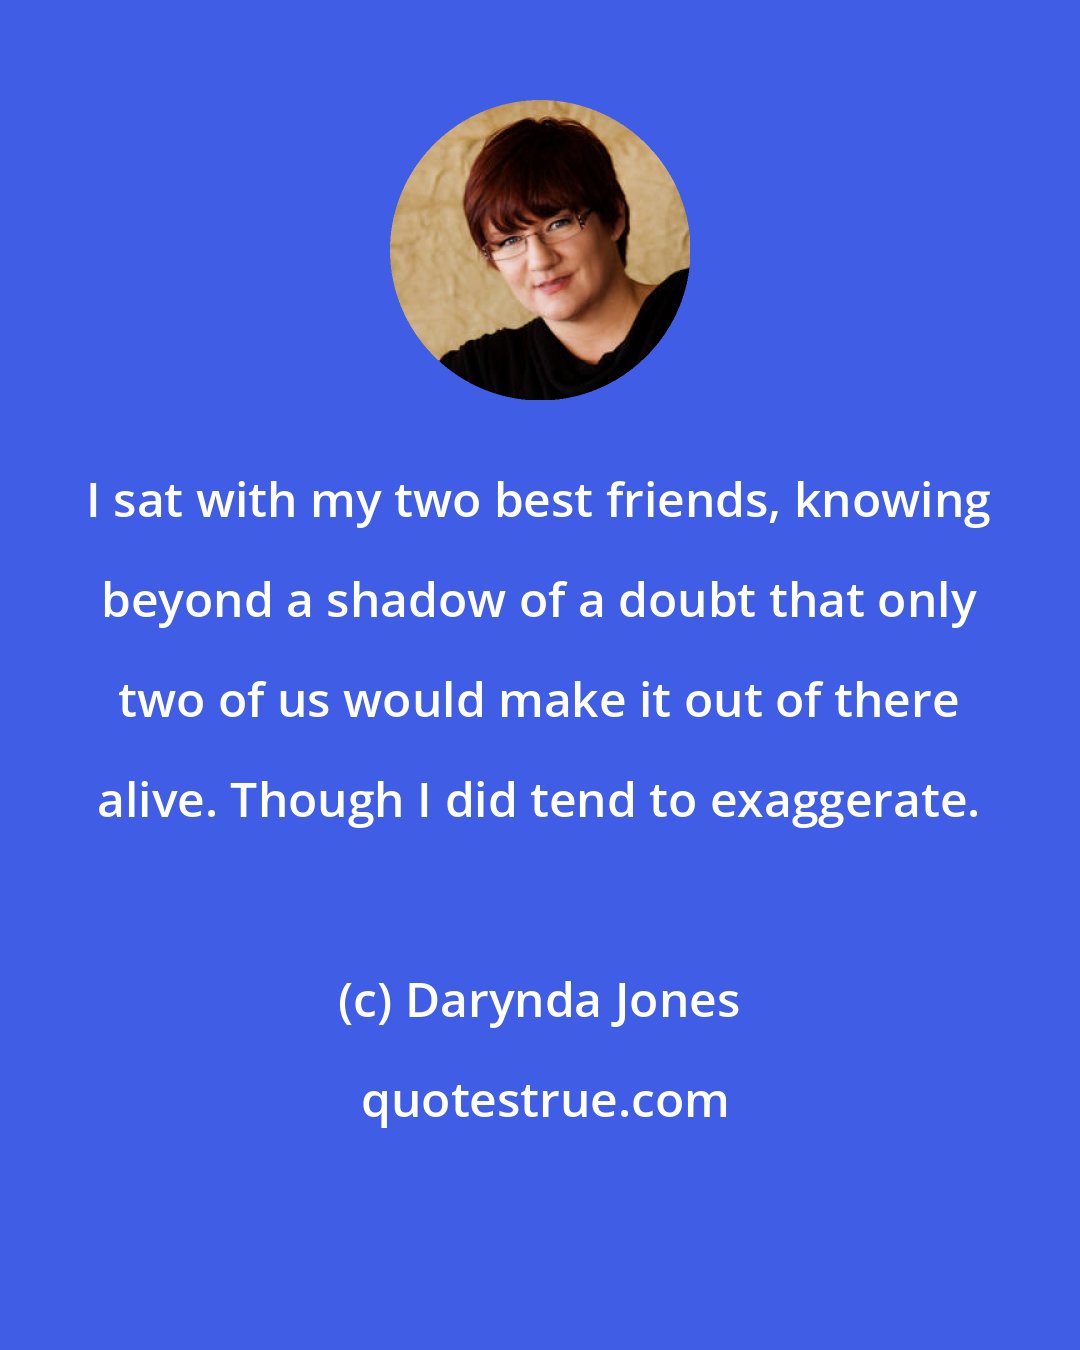 Darynda Jones: I sat with my two best friends, knowing beyond a shadow of a doubt that only two of us would make it out of there alive. Though I did tend to exaggerate.